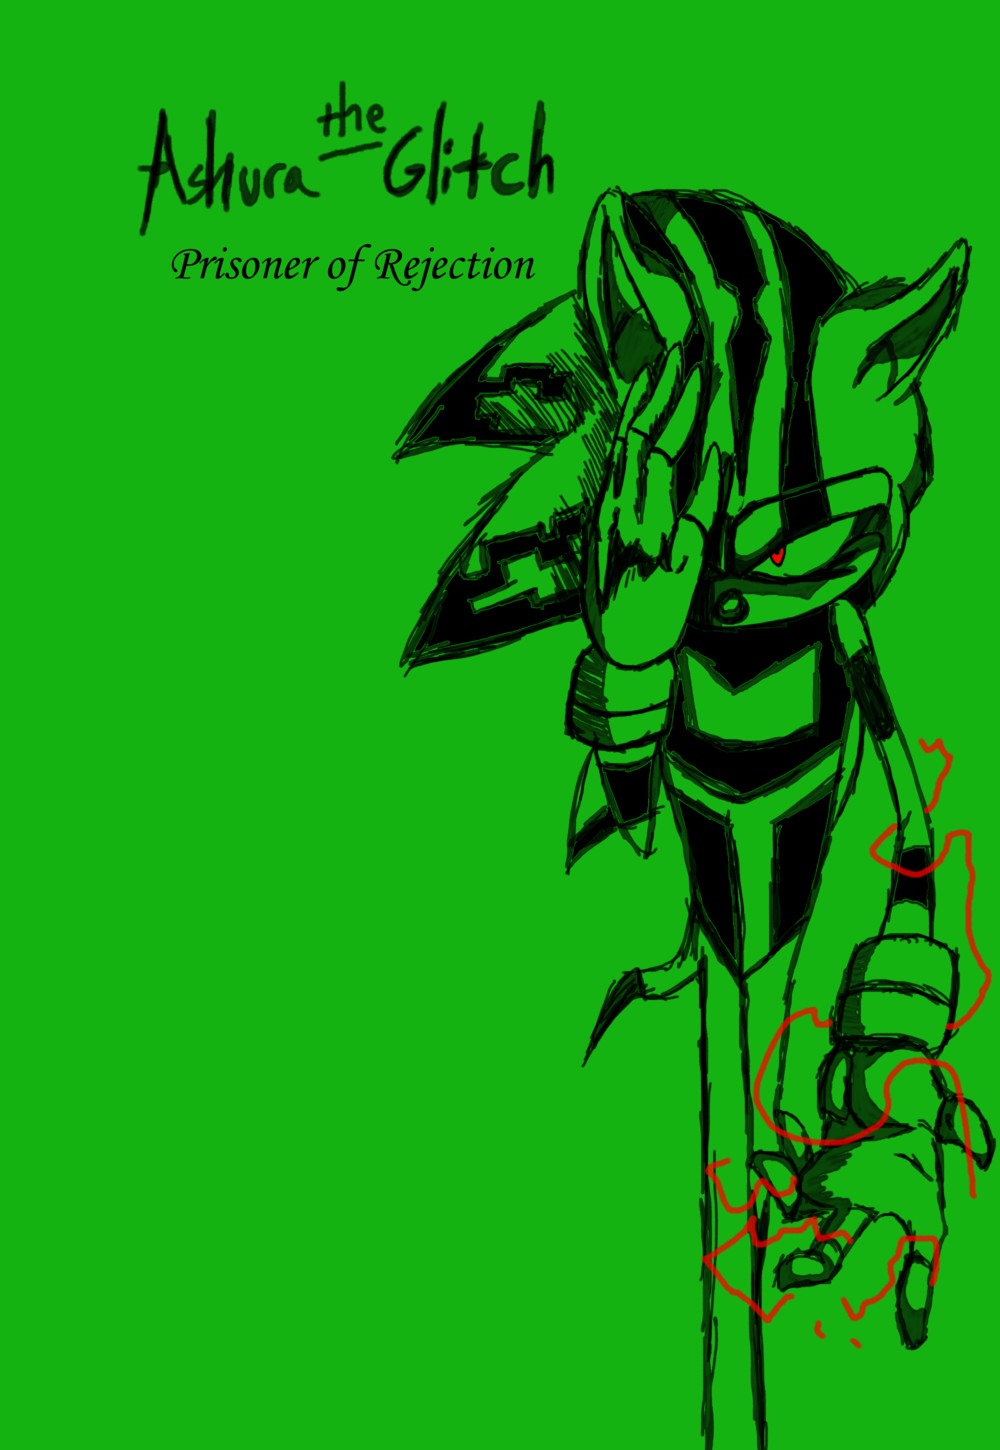 Prisoner of Rejection - Ashura by TheGameArtCritic